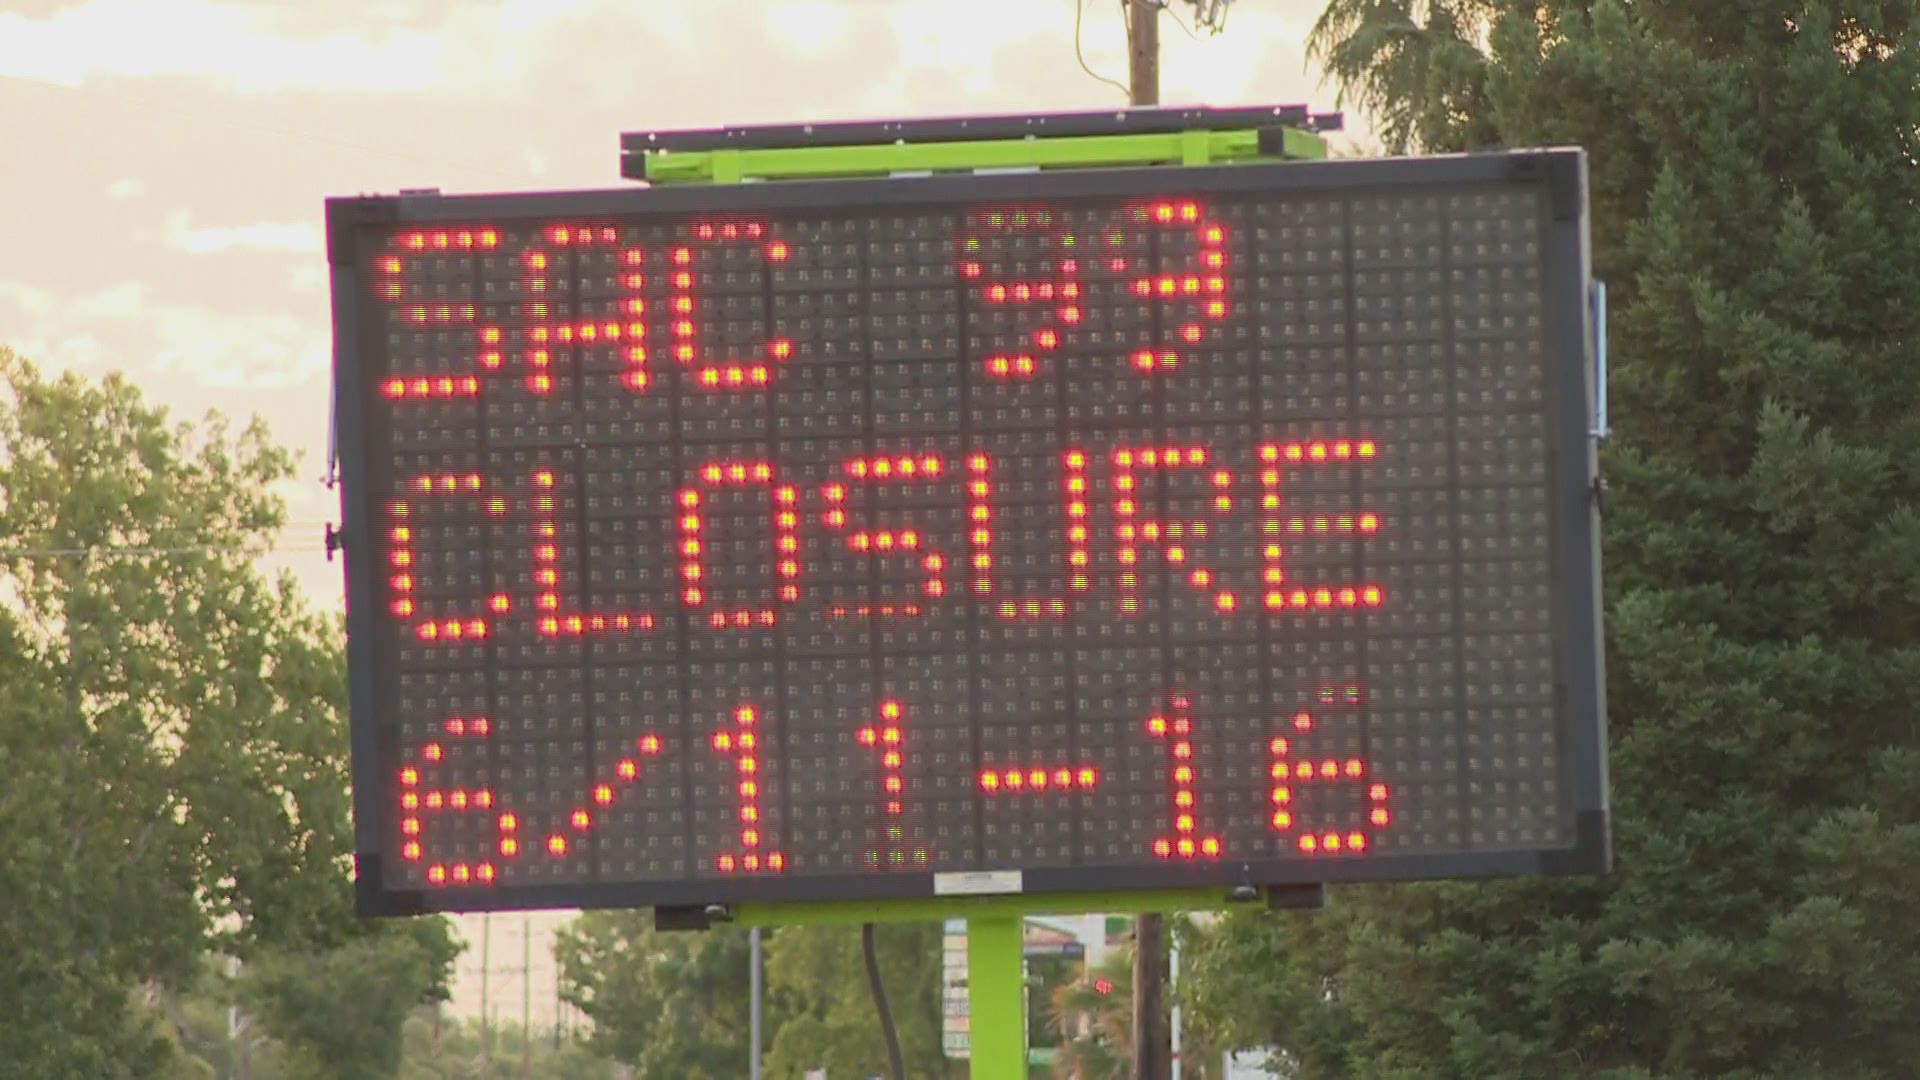 With the highway closed, businesses are worried about how much congestion there will be on the side streets and how difficult it will be to get to some businesses.